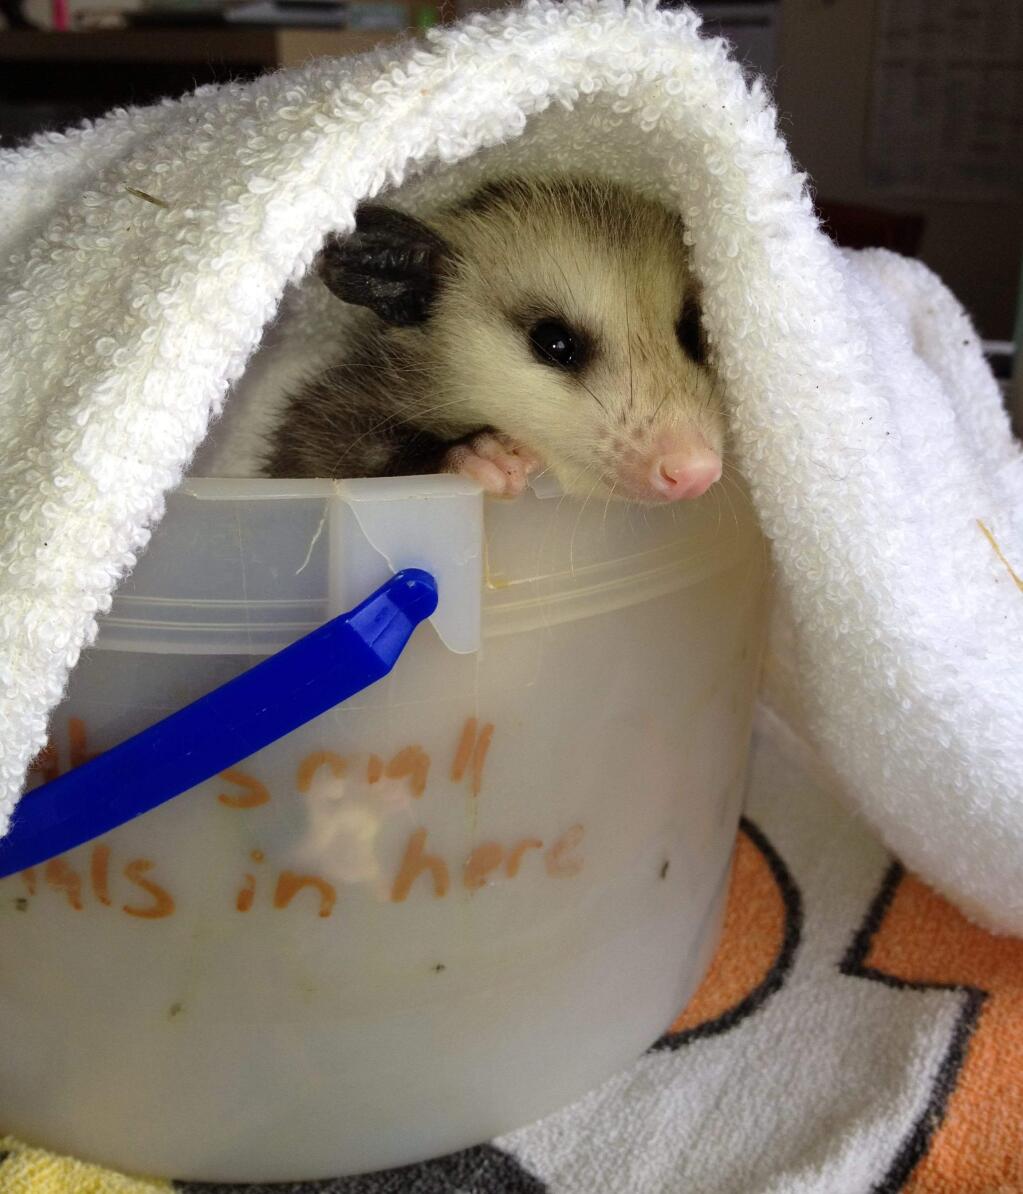 Photos by Sonoma County Wildlife rescueAnimals will often seek out warm and dry areas to have their babies. Raccoons prefer attics, while skunks prefer lower areas, such as crawl spaces.